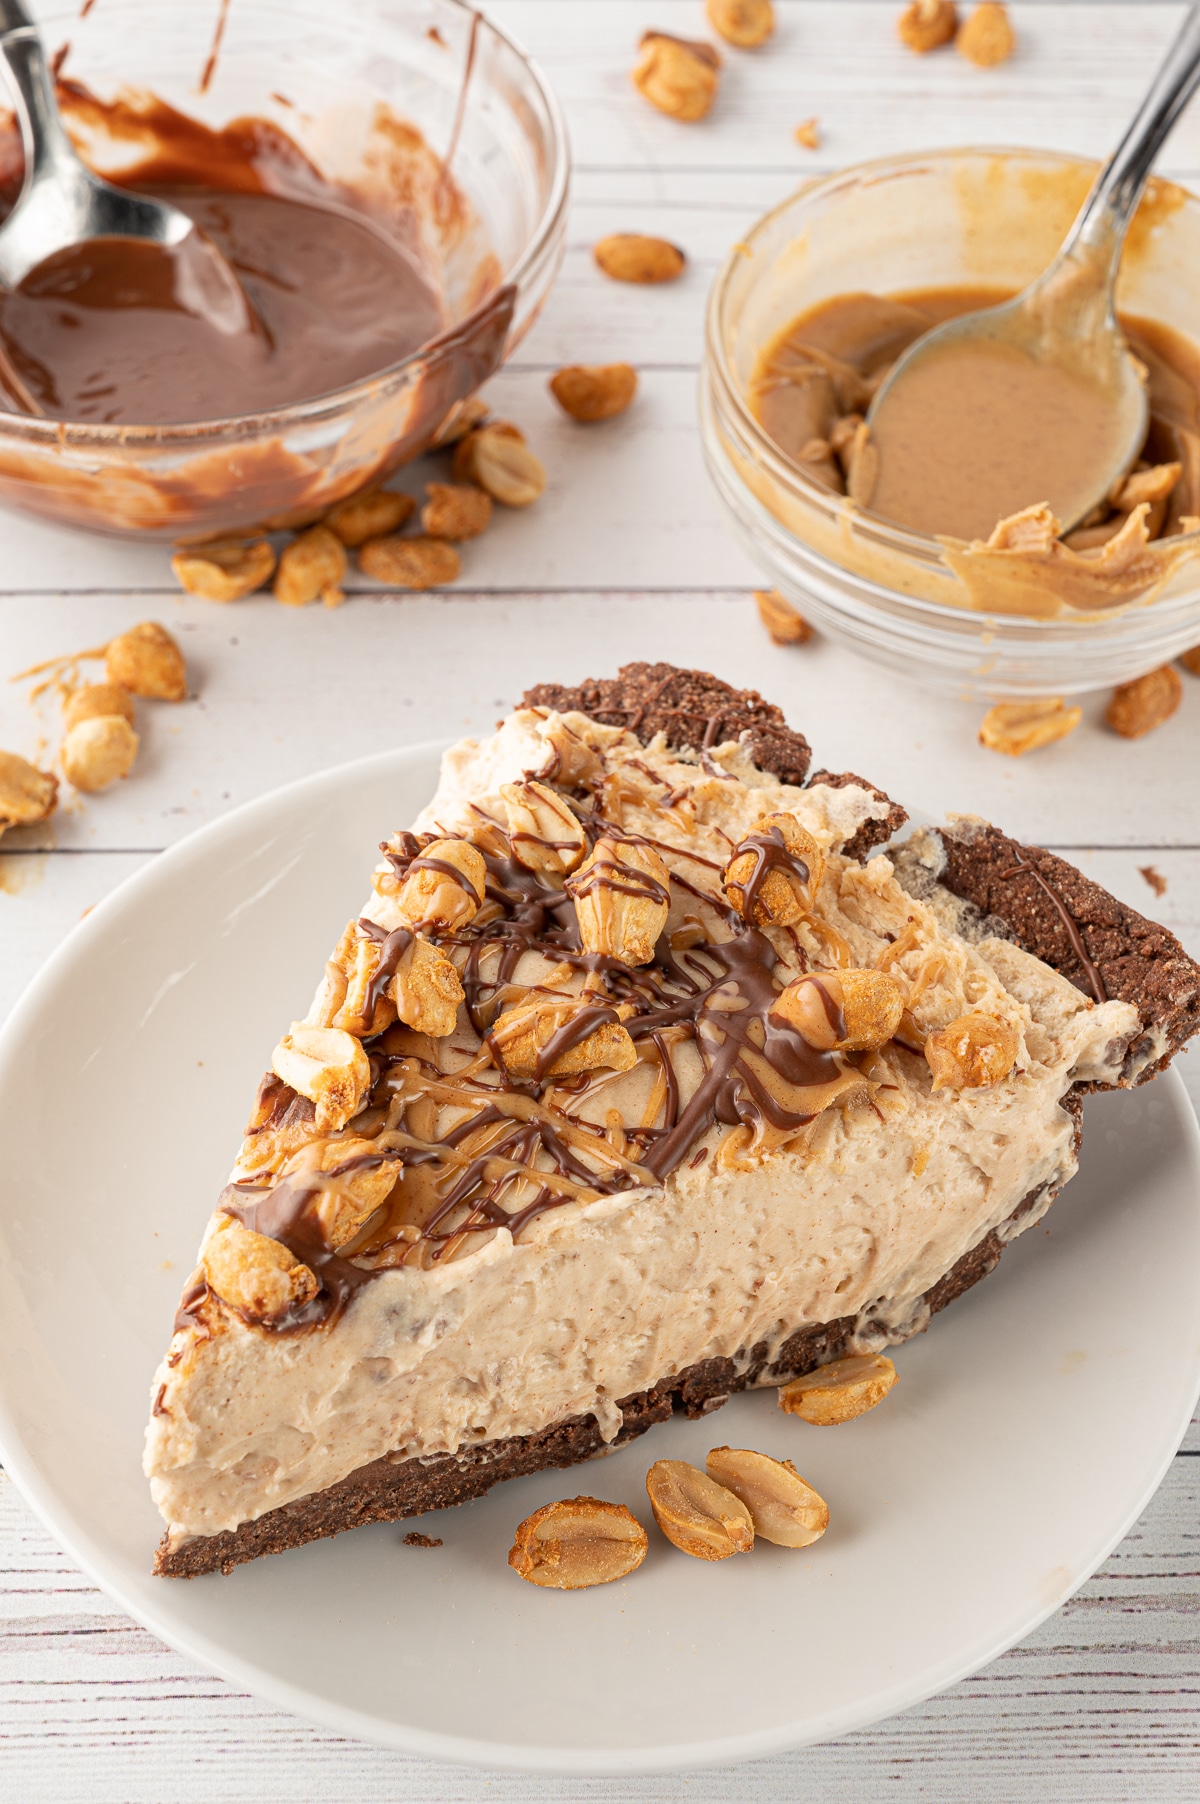 A slice of peanut butter pie with scattered peanuts, and bowls of melted chocolate ganache and peanut butter in the background